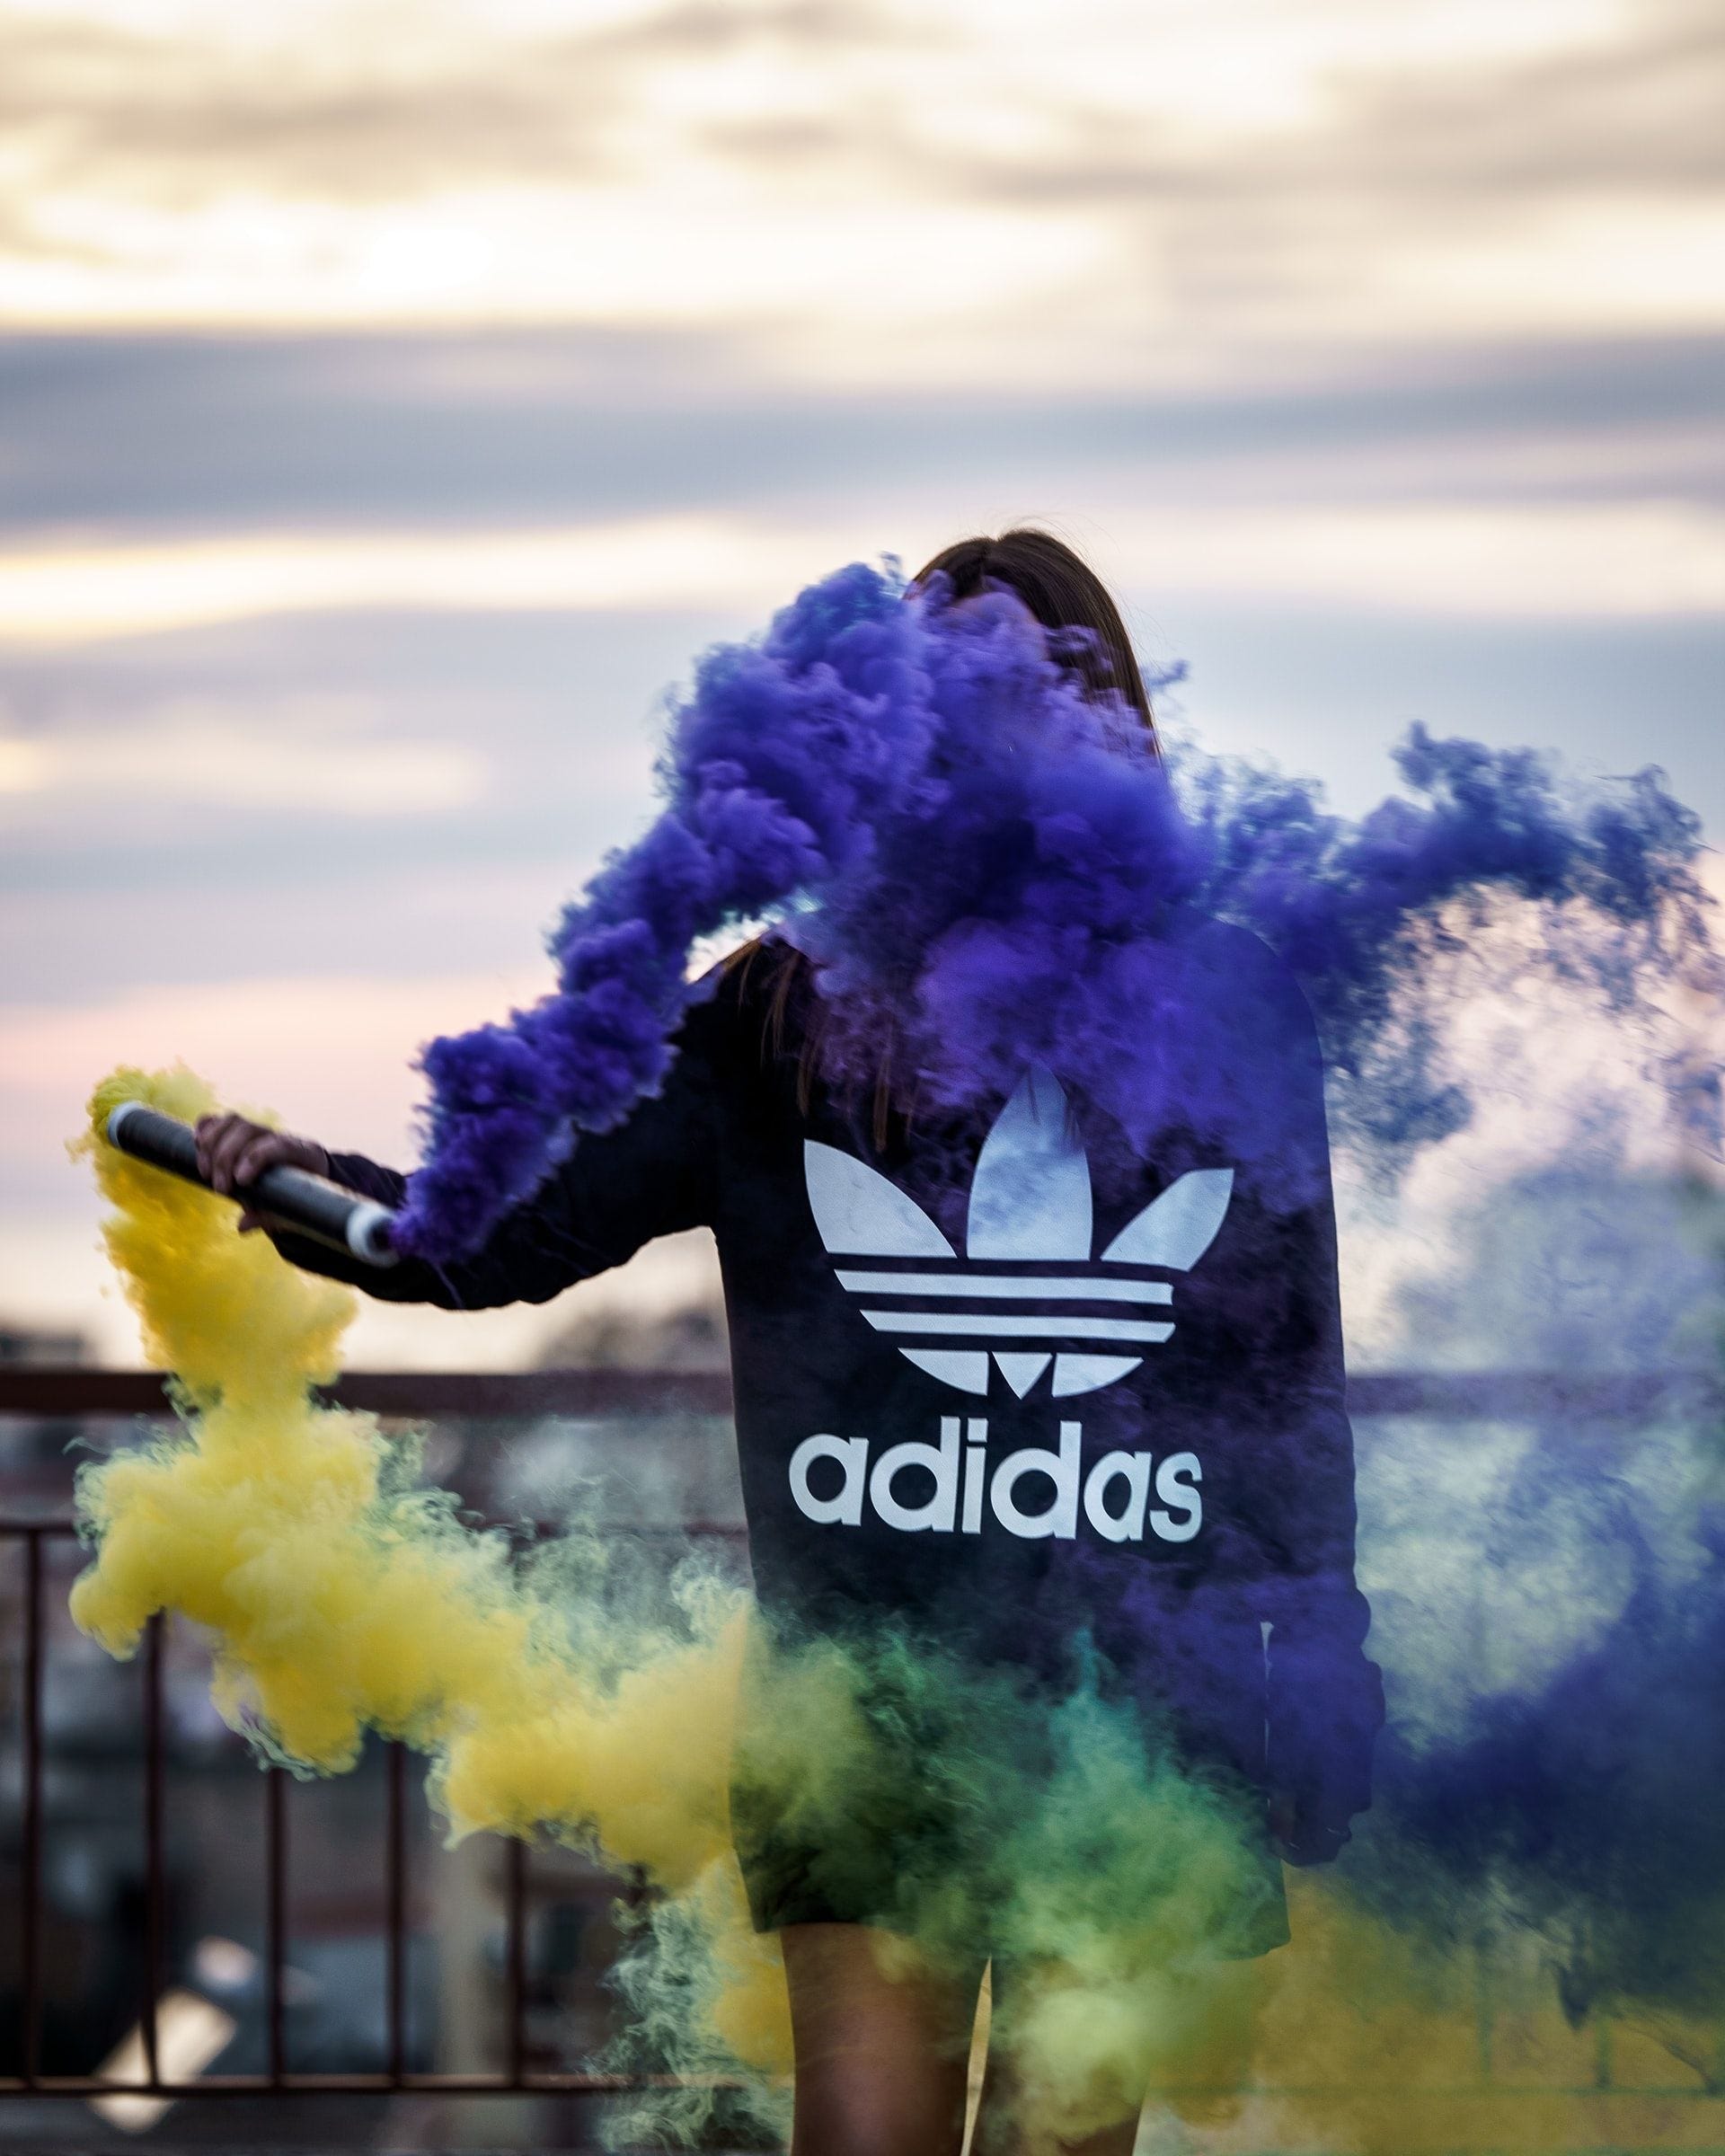 How do influencers help Adidas to increase sales?